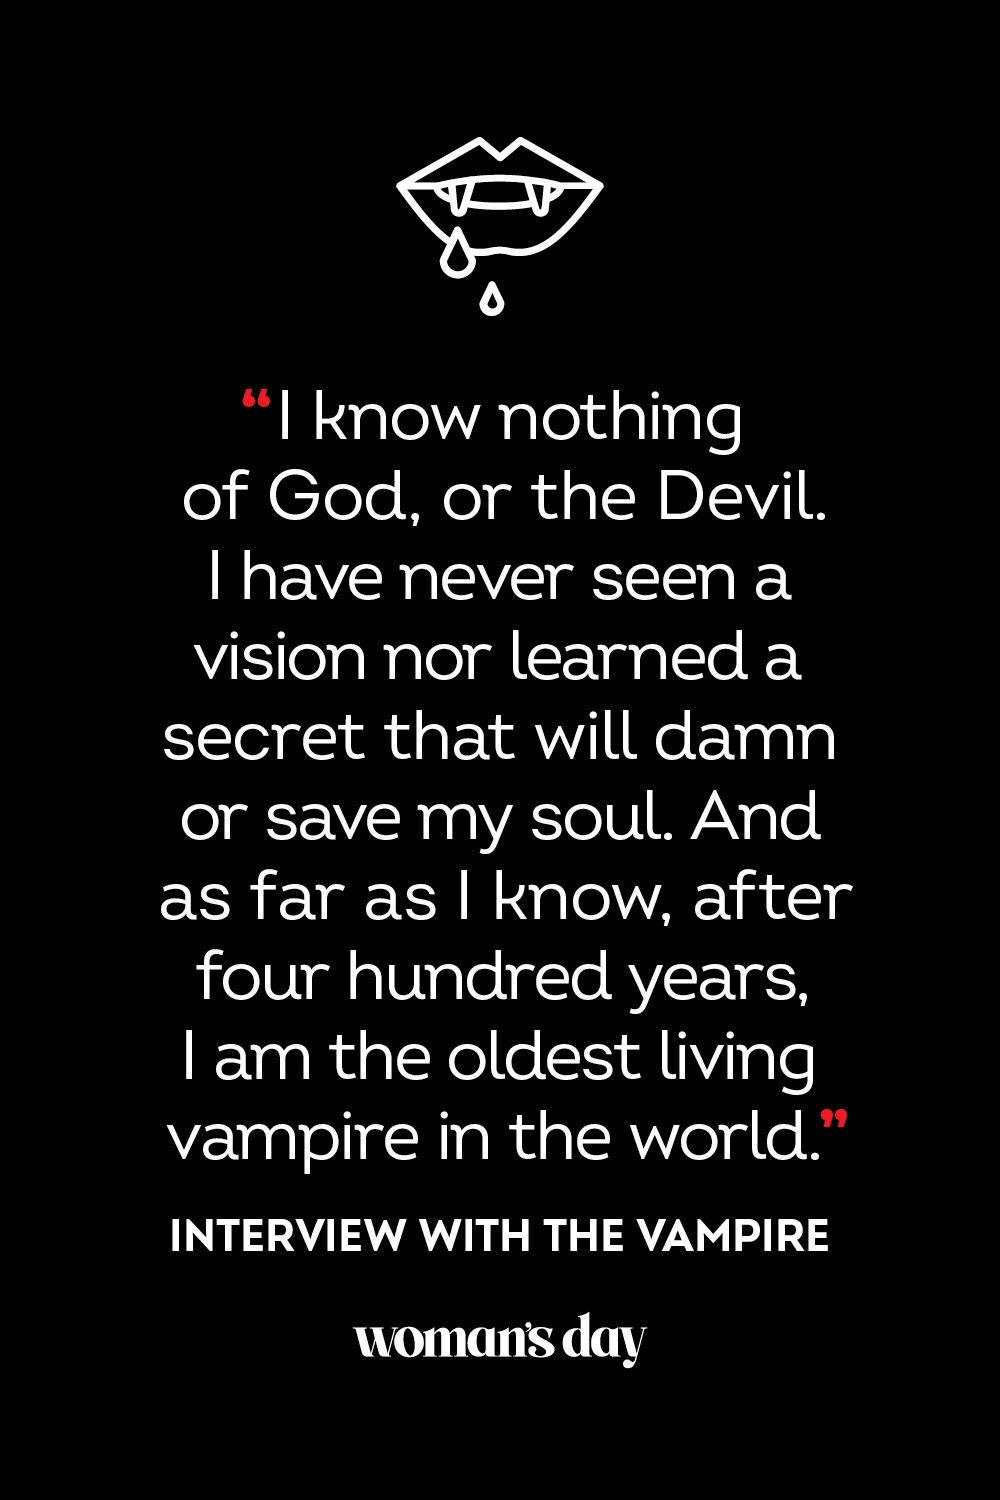 20 Best Vampire Quotes - Quotes About Vampires For Halloween